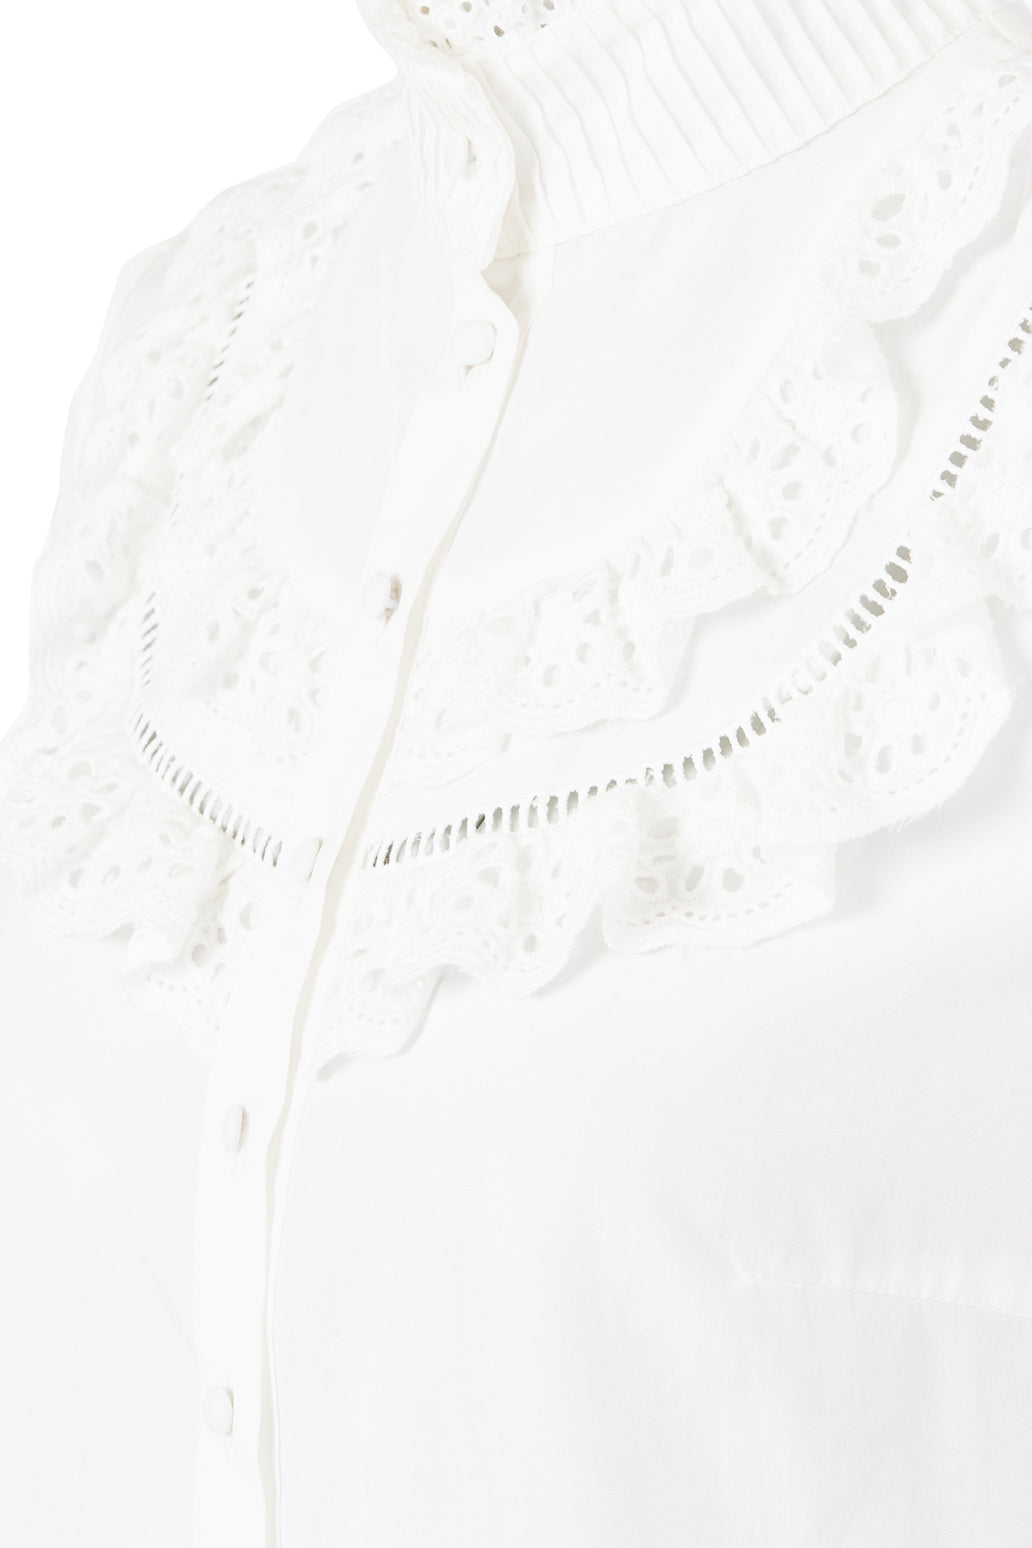 detail image of ruffle and lace chest detail